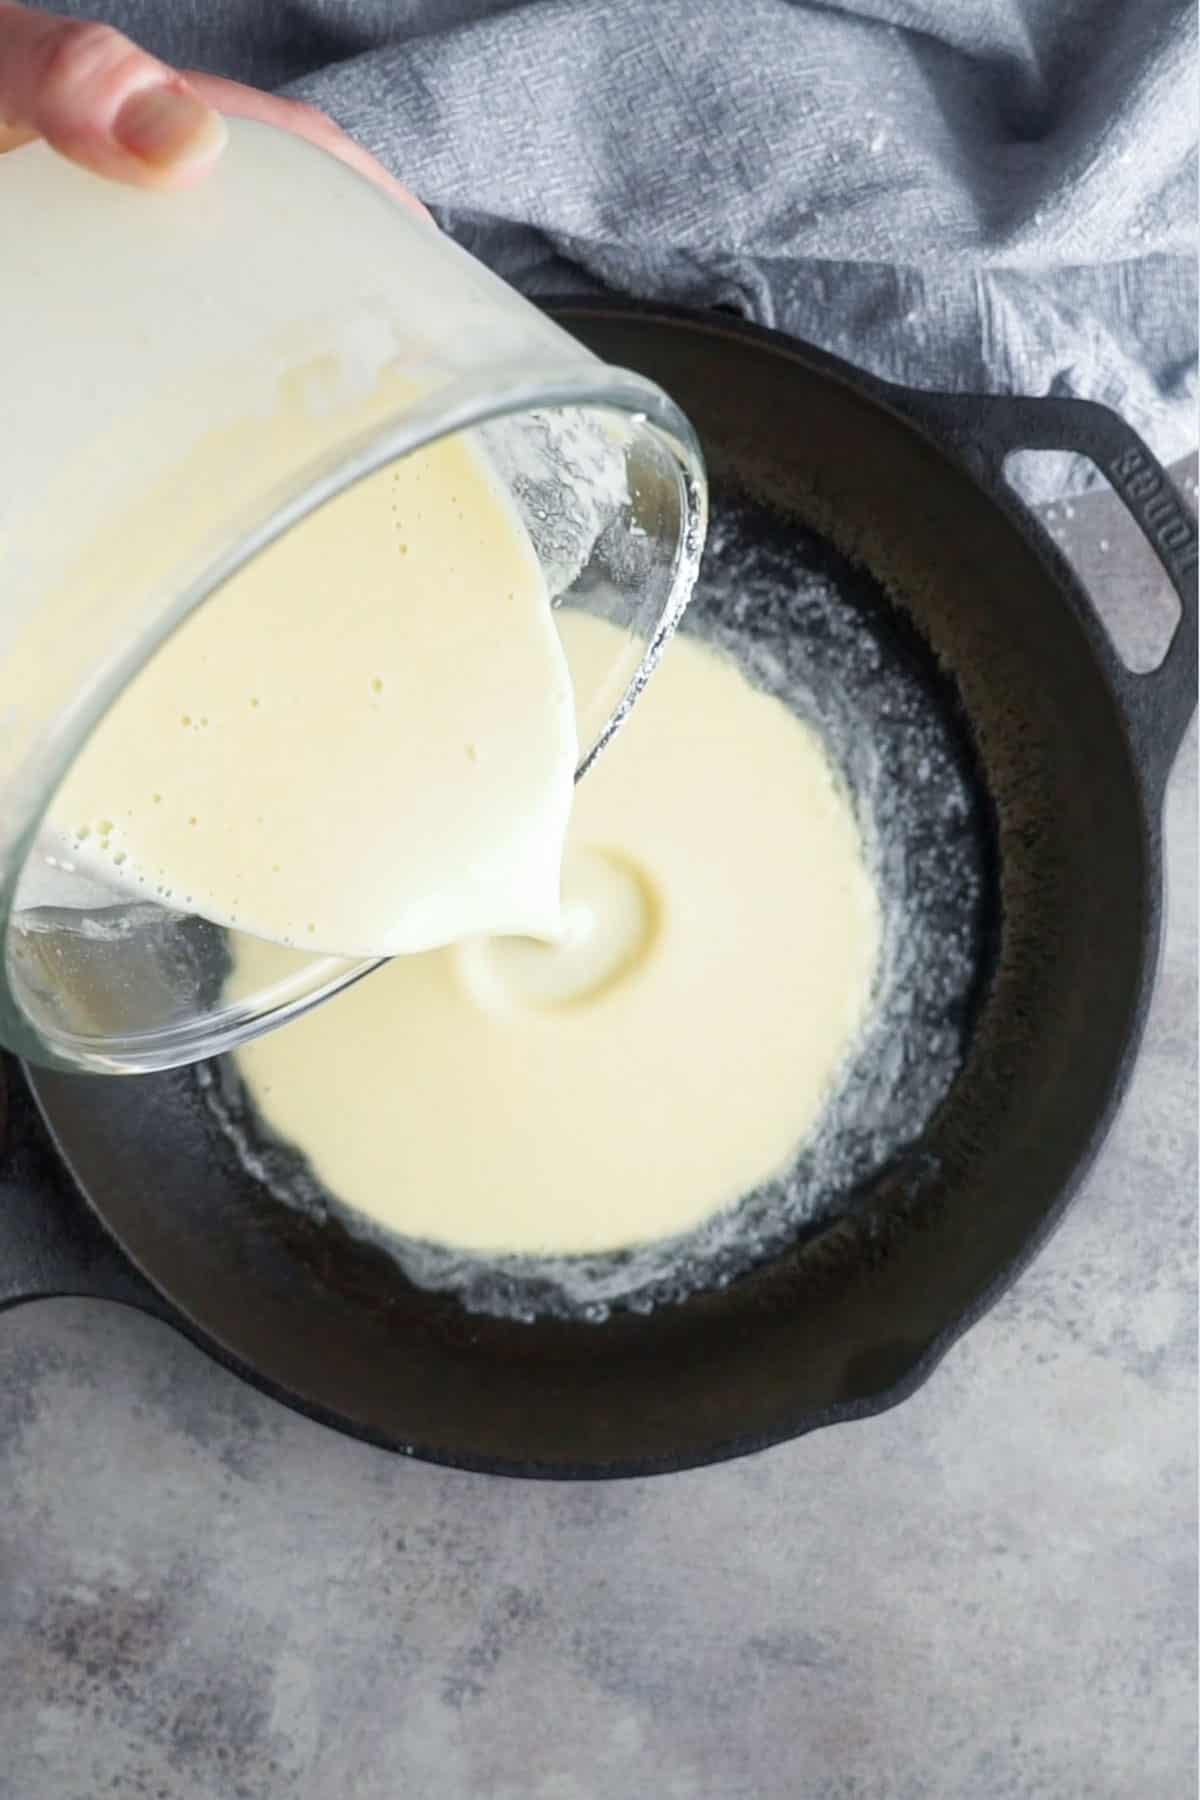 dutch baby batter is poured into cast iron skillet